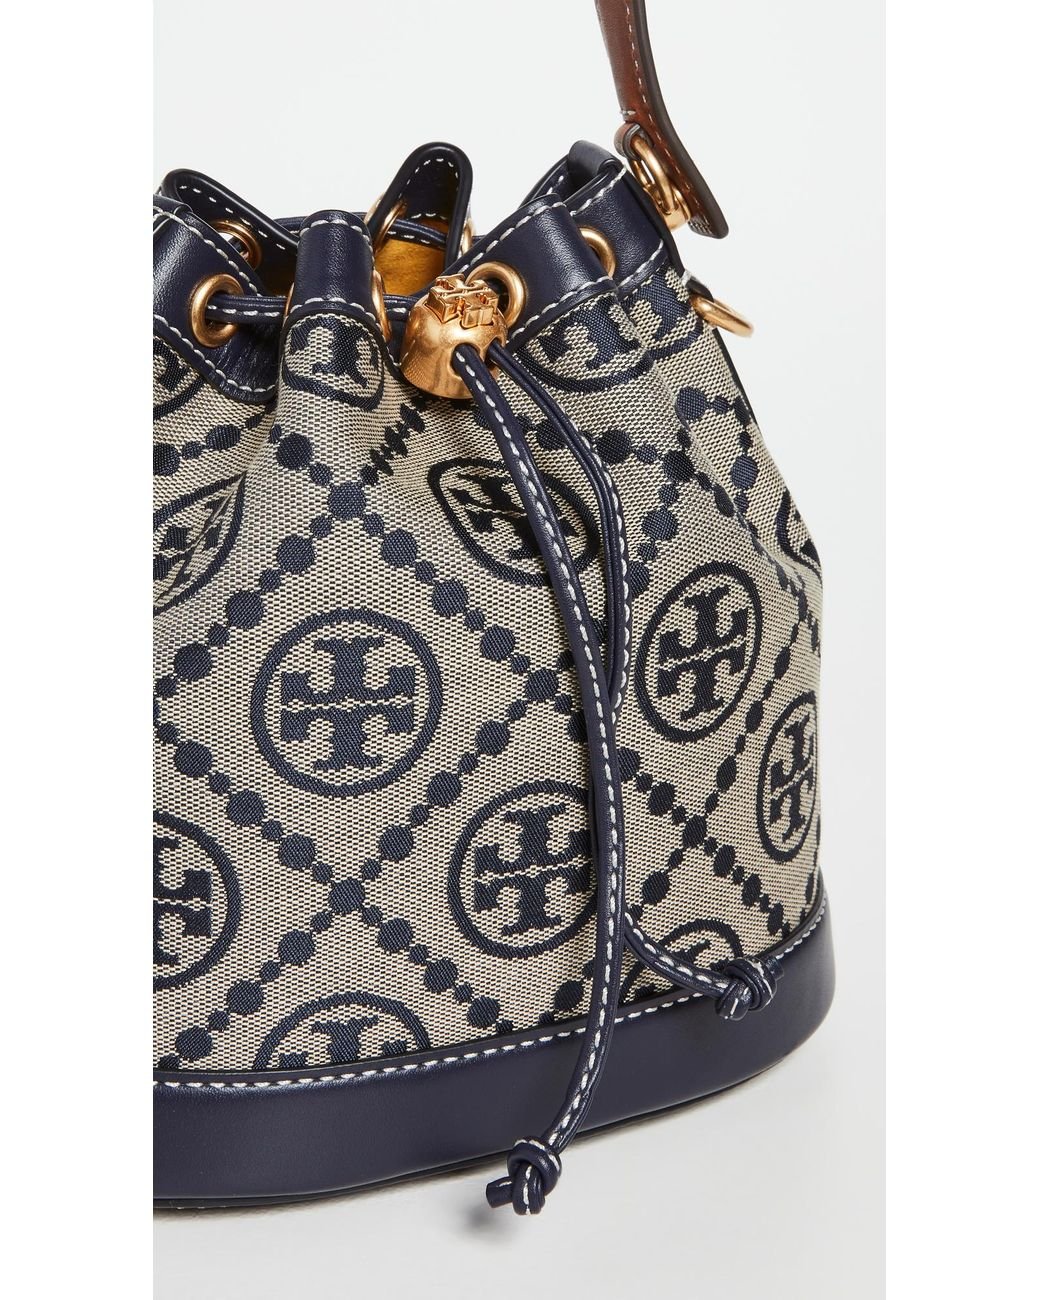 Tory Burch Leather T Monogram Jacquard Bucket Bag in Navy Blue 